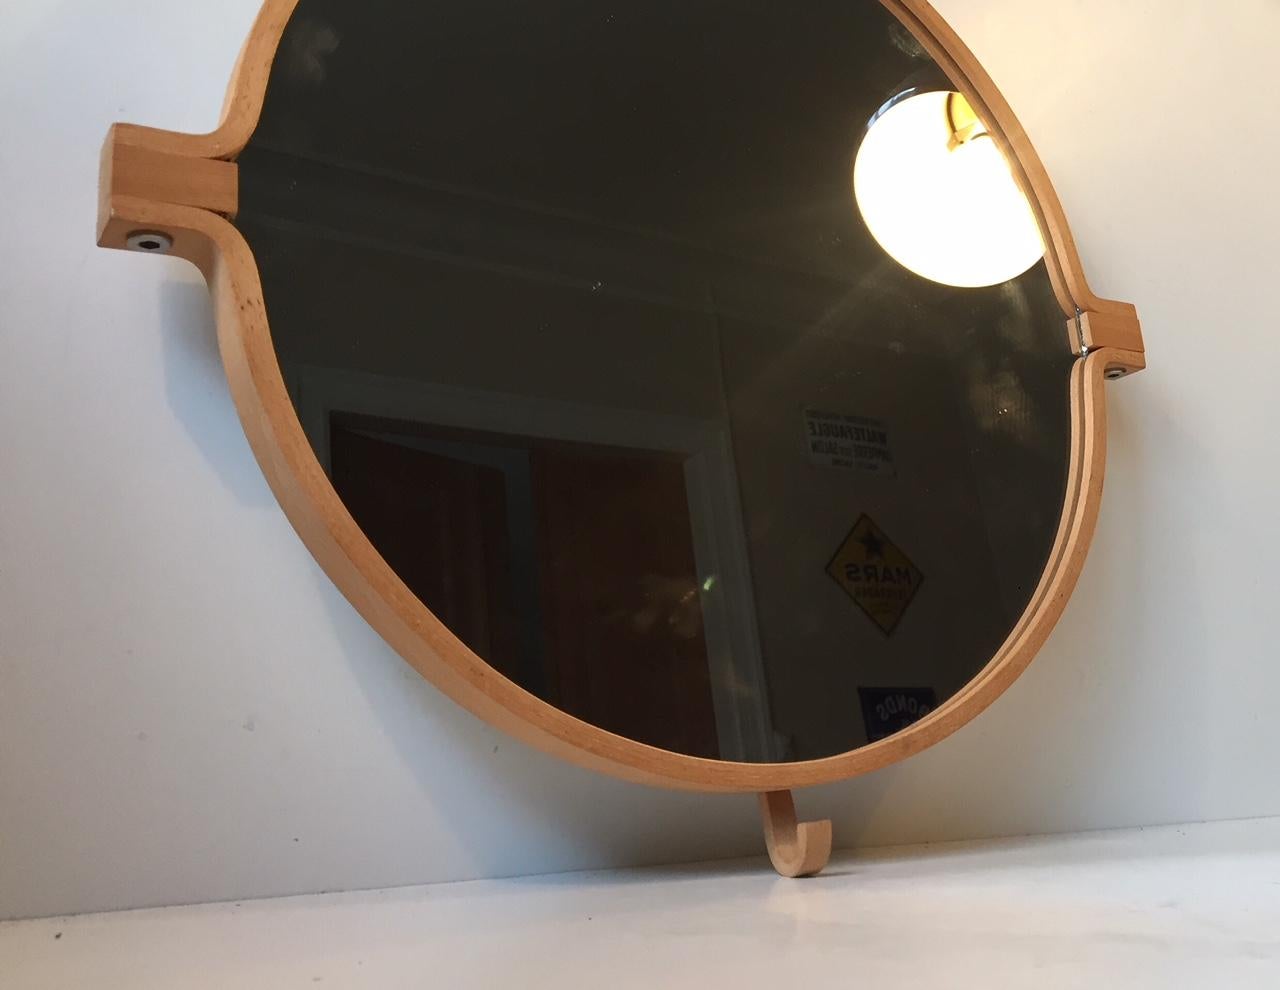 A bend wood wall mirror in beech. Designed and manufactured by Indan in Denmark during the 1980s. This is design number: 009 and it features a practical built in hook to the bottom.